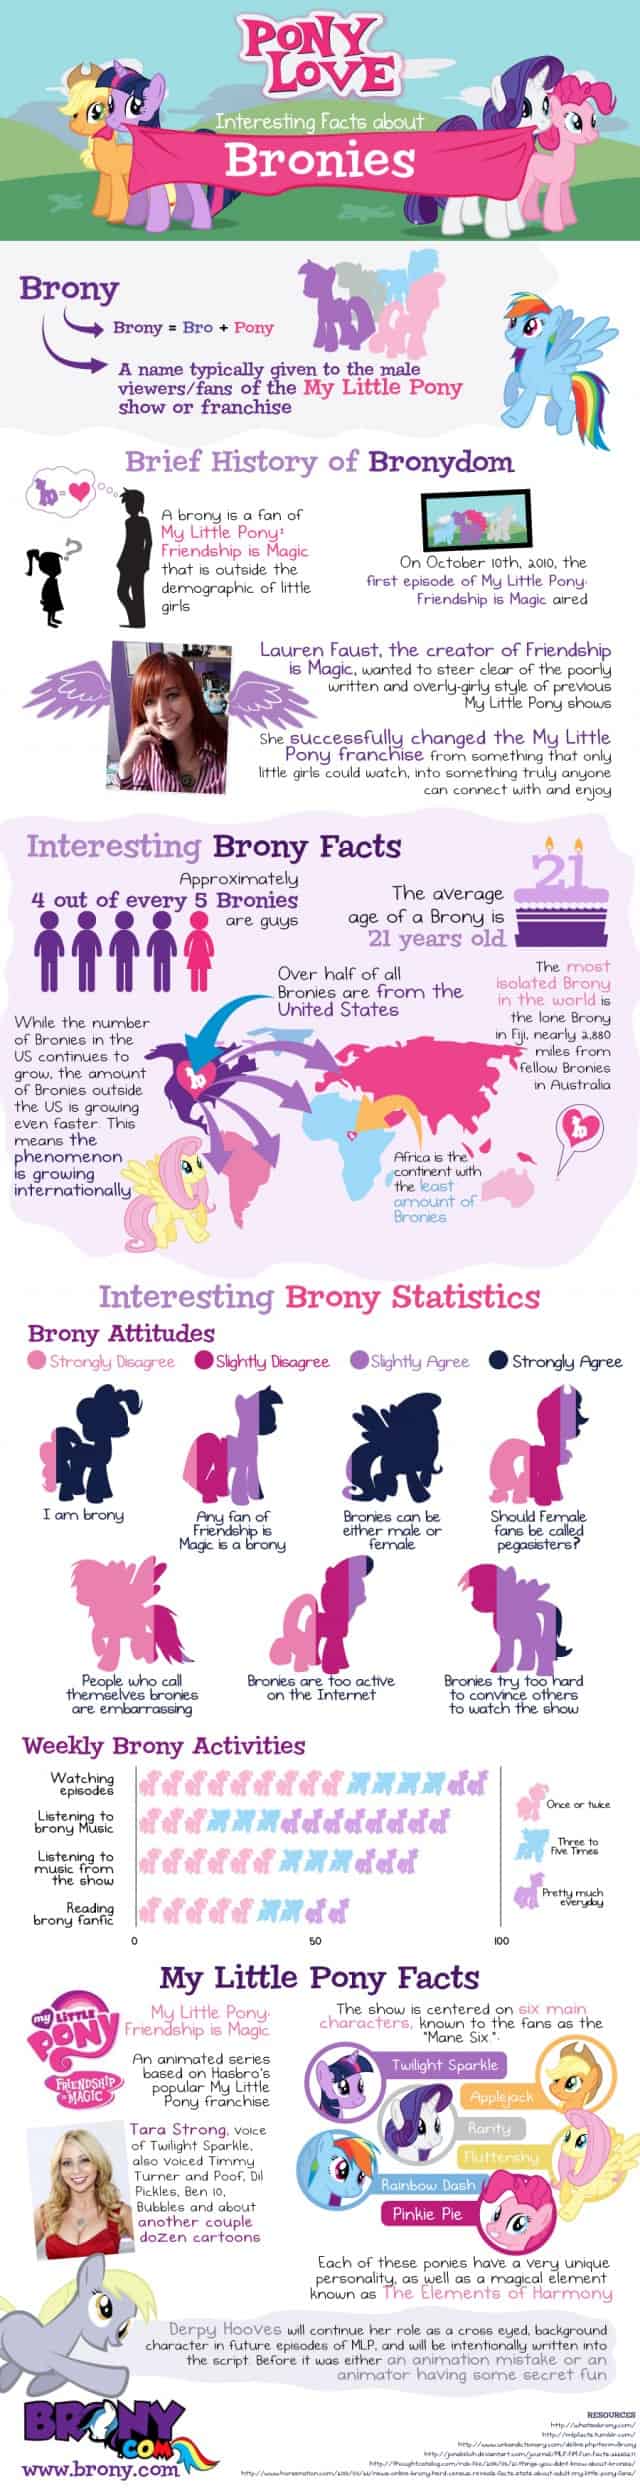 Interesting Facts About Bronies